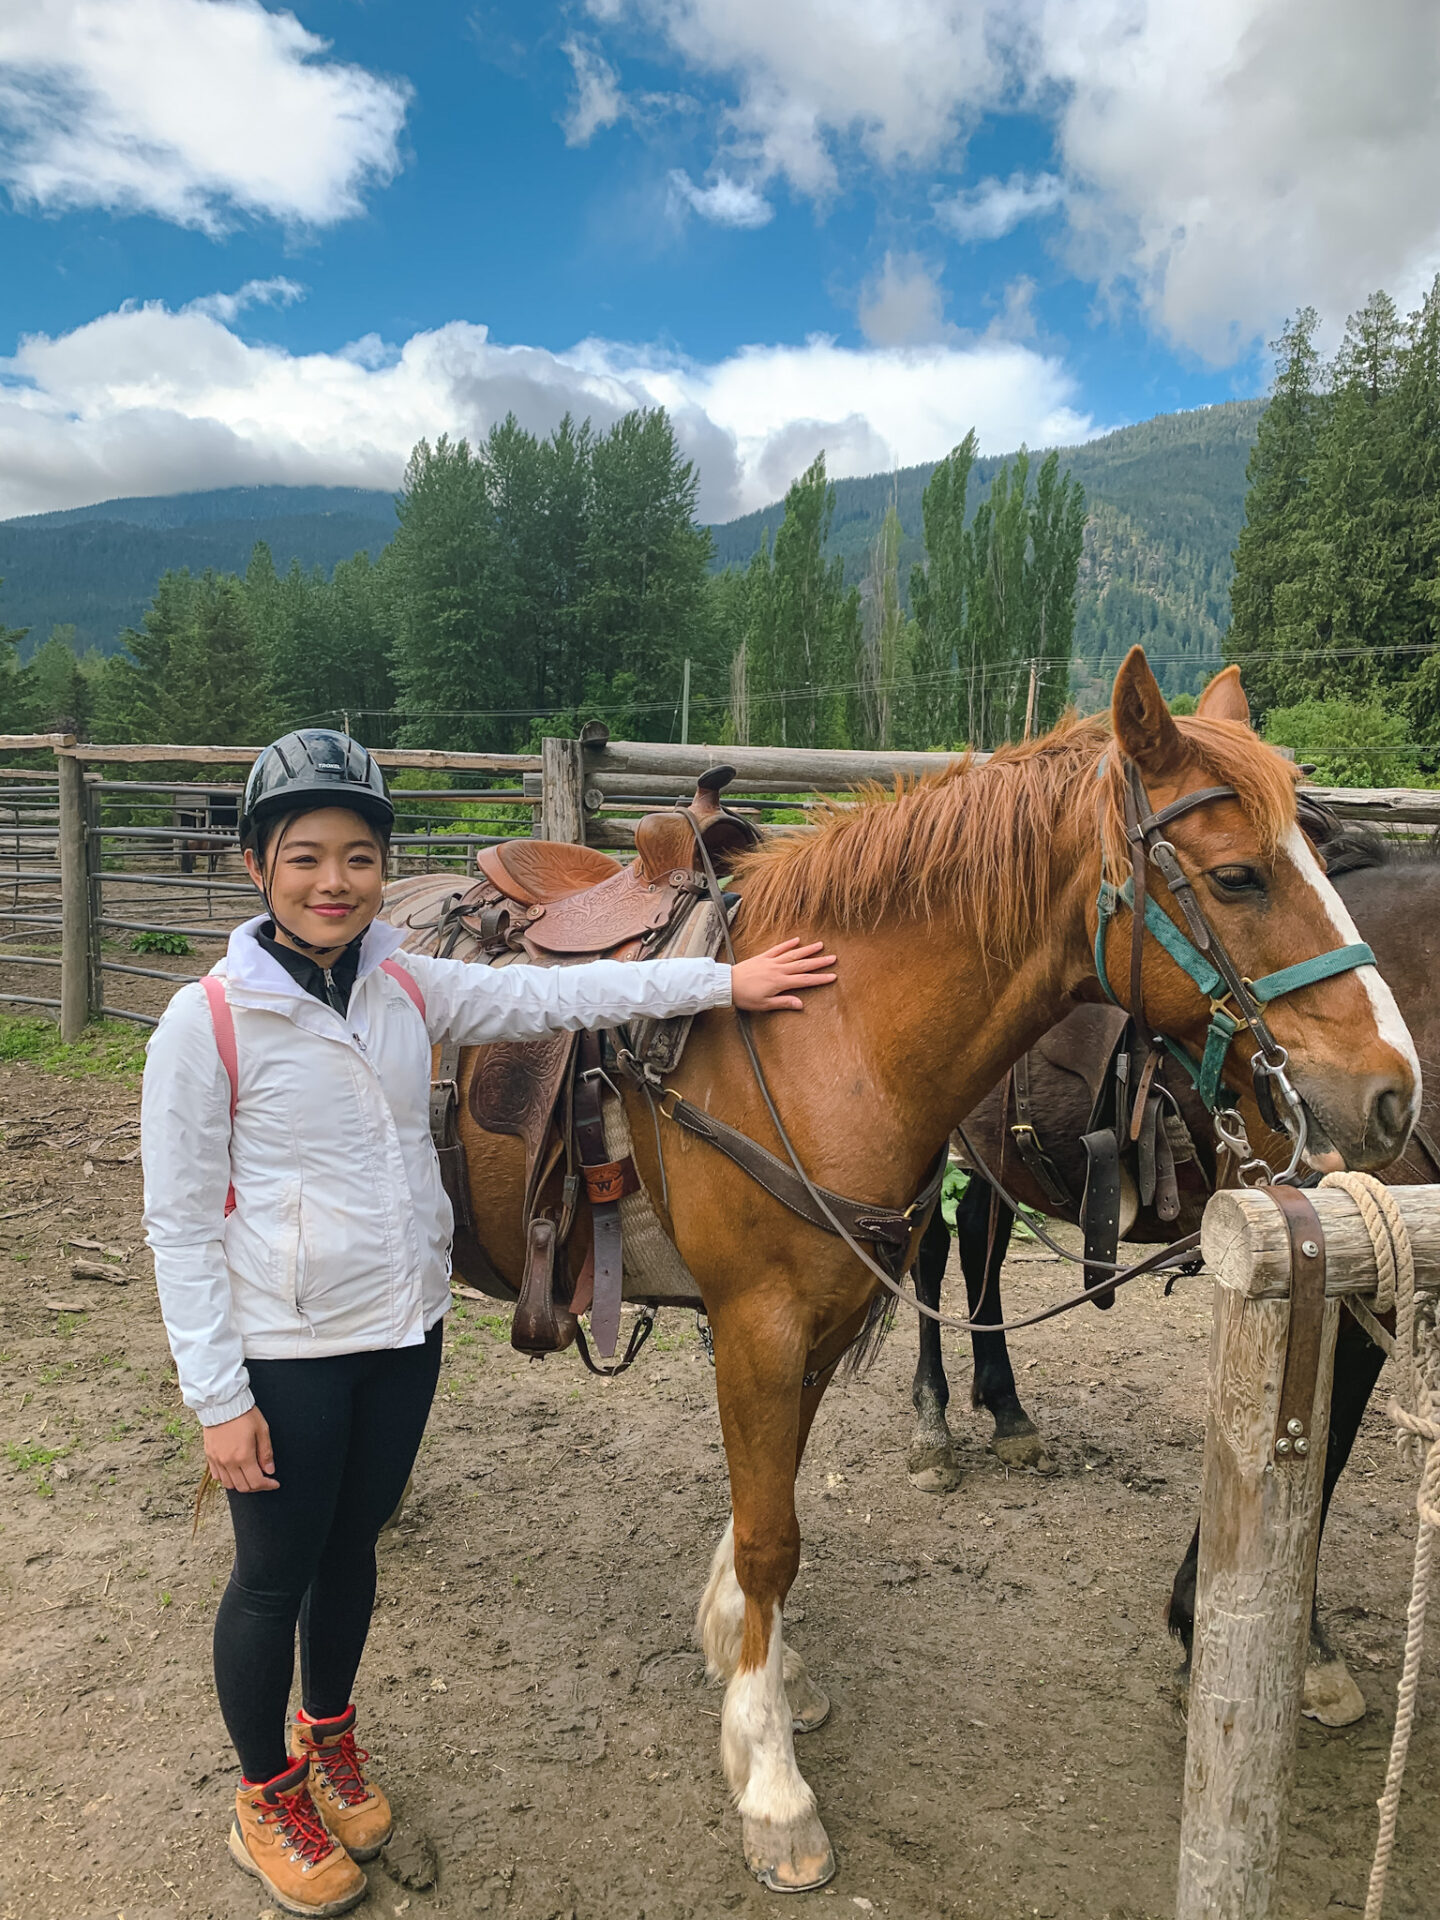 Guided horseback riding tour with Copper Cayuse Outfitters in Pemberton near Whistler, British Columbia